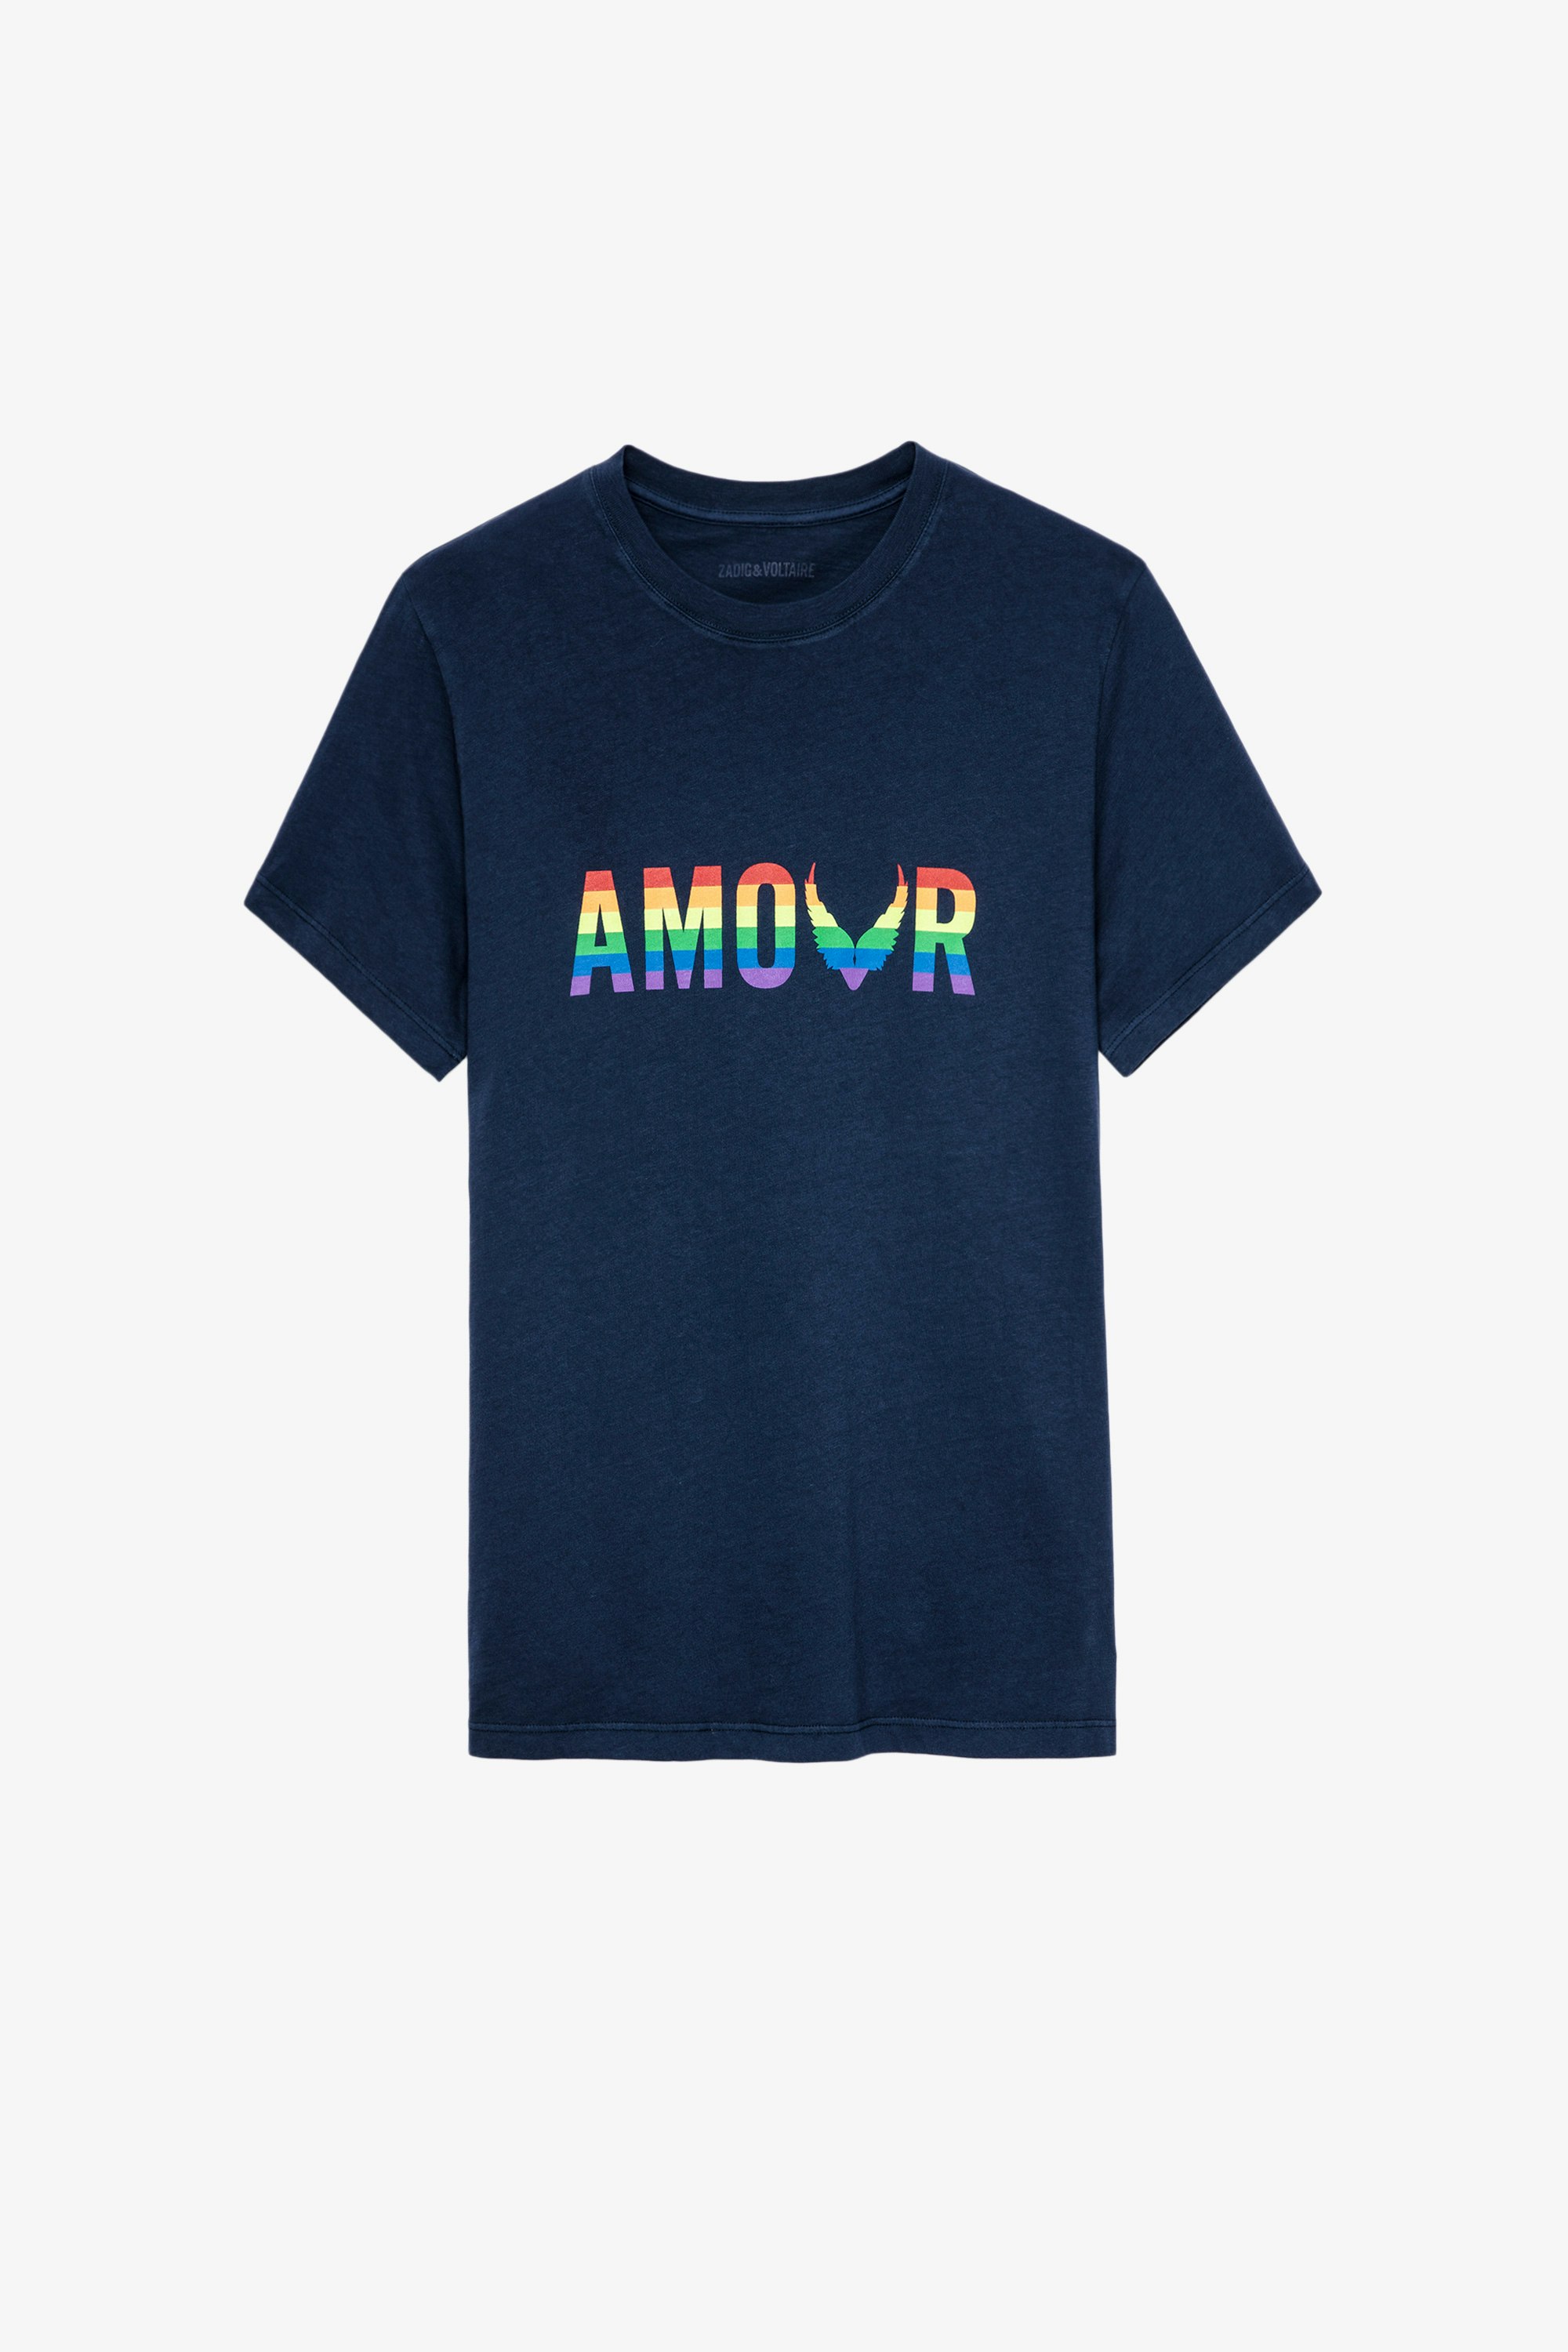 Tommy Amour Wings T-shirt Women’s navy blue cotton T-shirt with multicoloured Amour print